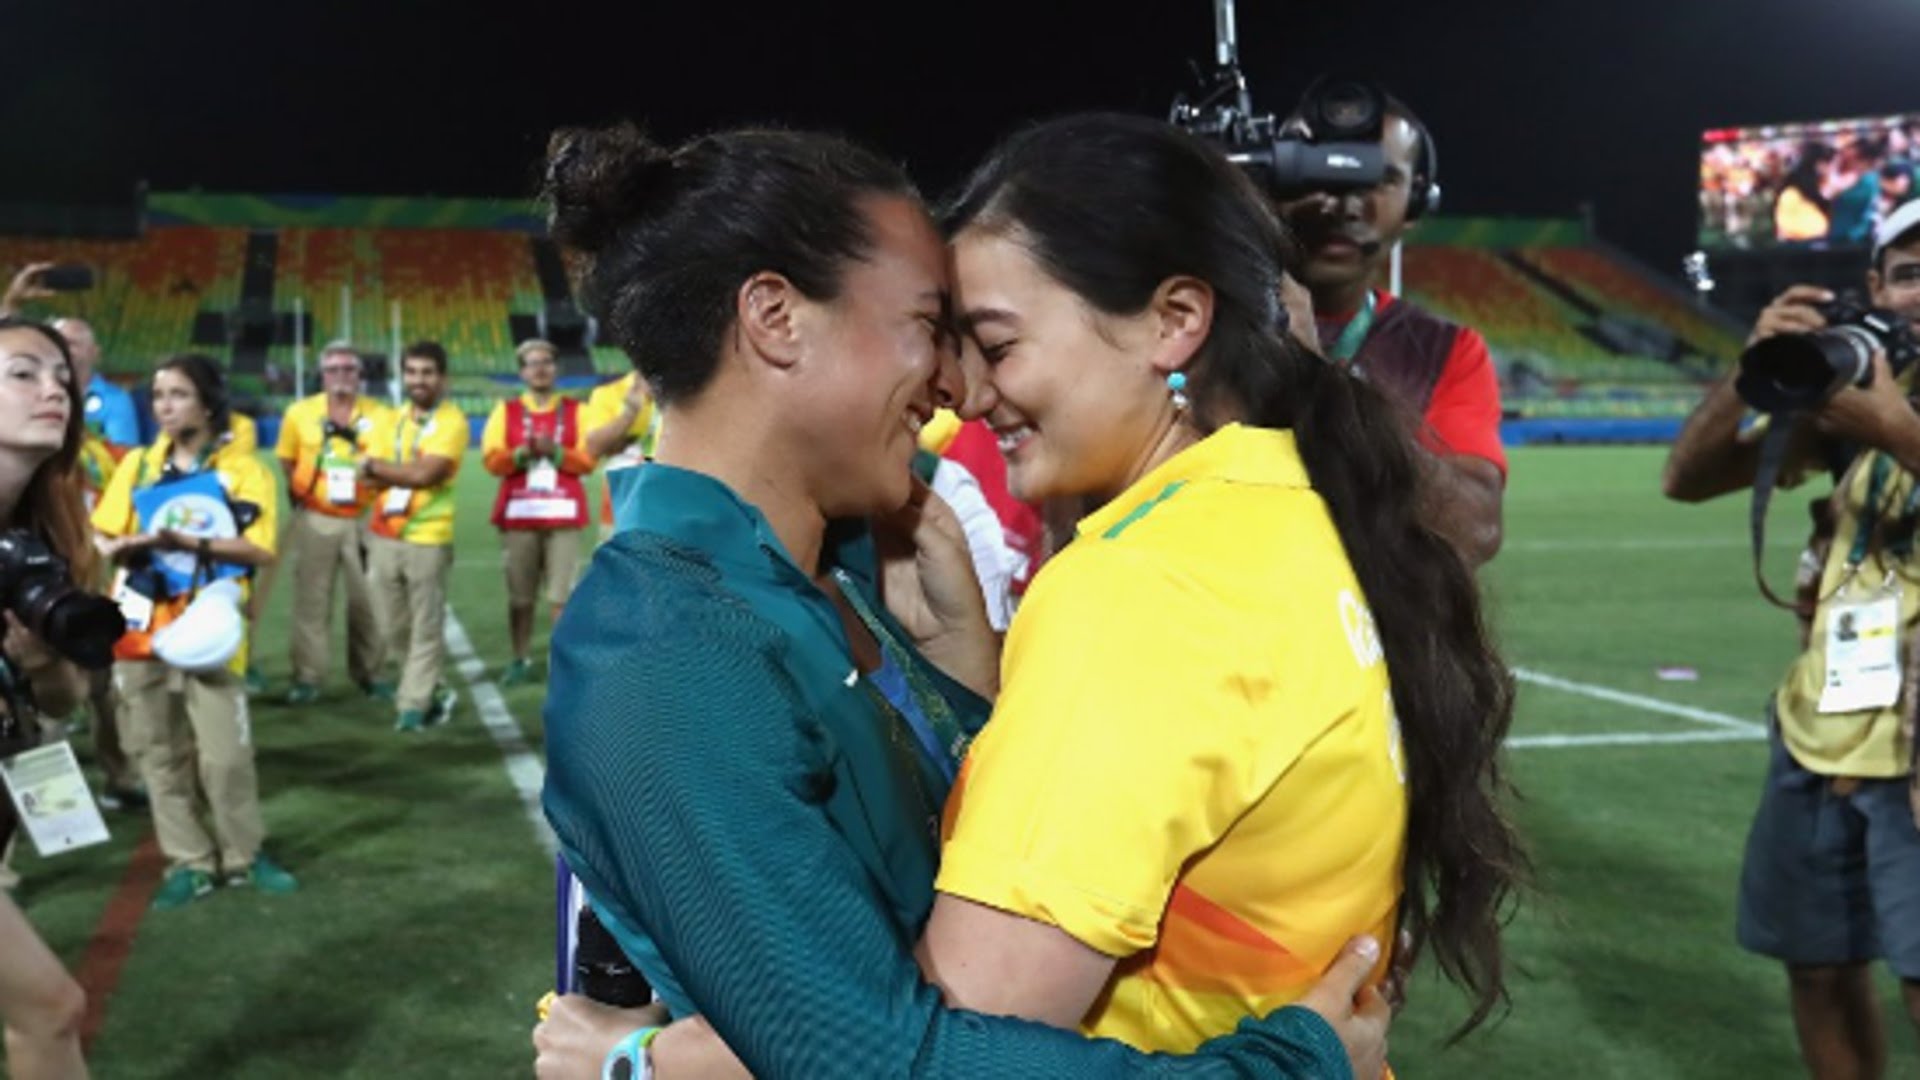 Volunteer Marjorie Enya proposes to rugby player Isadora Cerullo of Brazil at the Deodoro Stadium